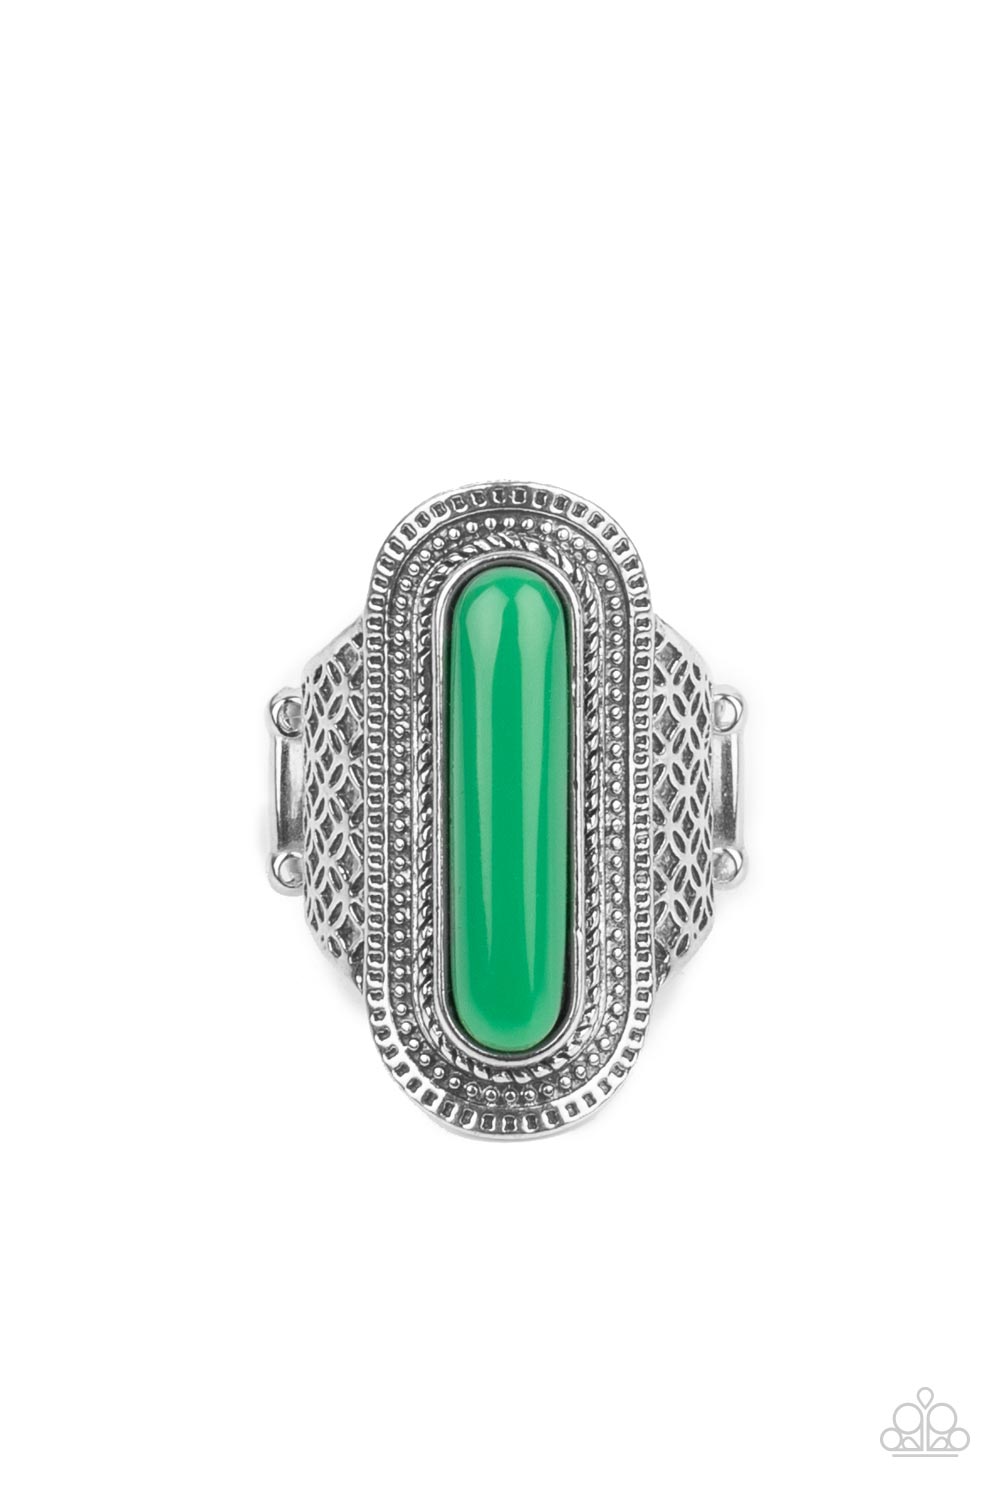 Dubai Distraction Green Ring - Paparazzi Accessories- lightbox - CarasShop.com - $5 Jewelry by Cara Jewels